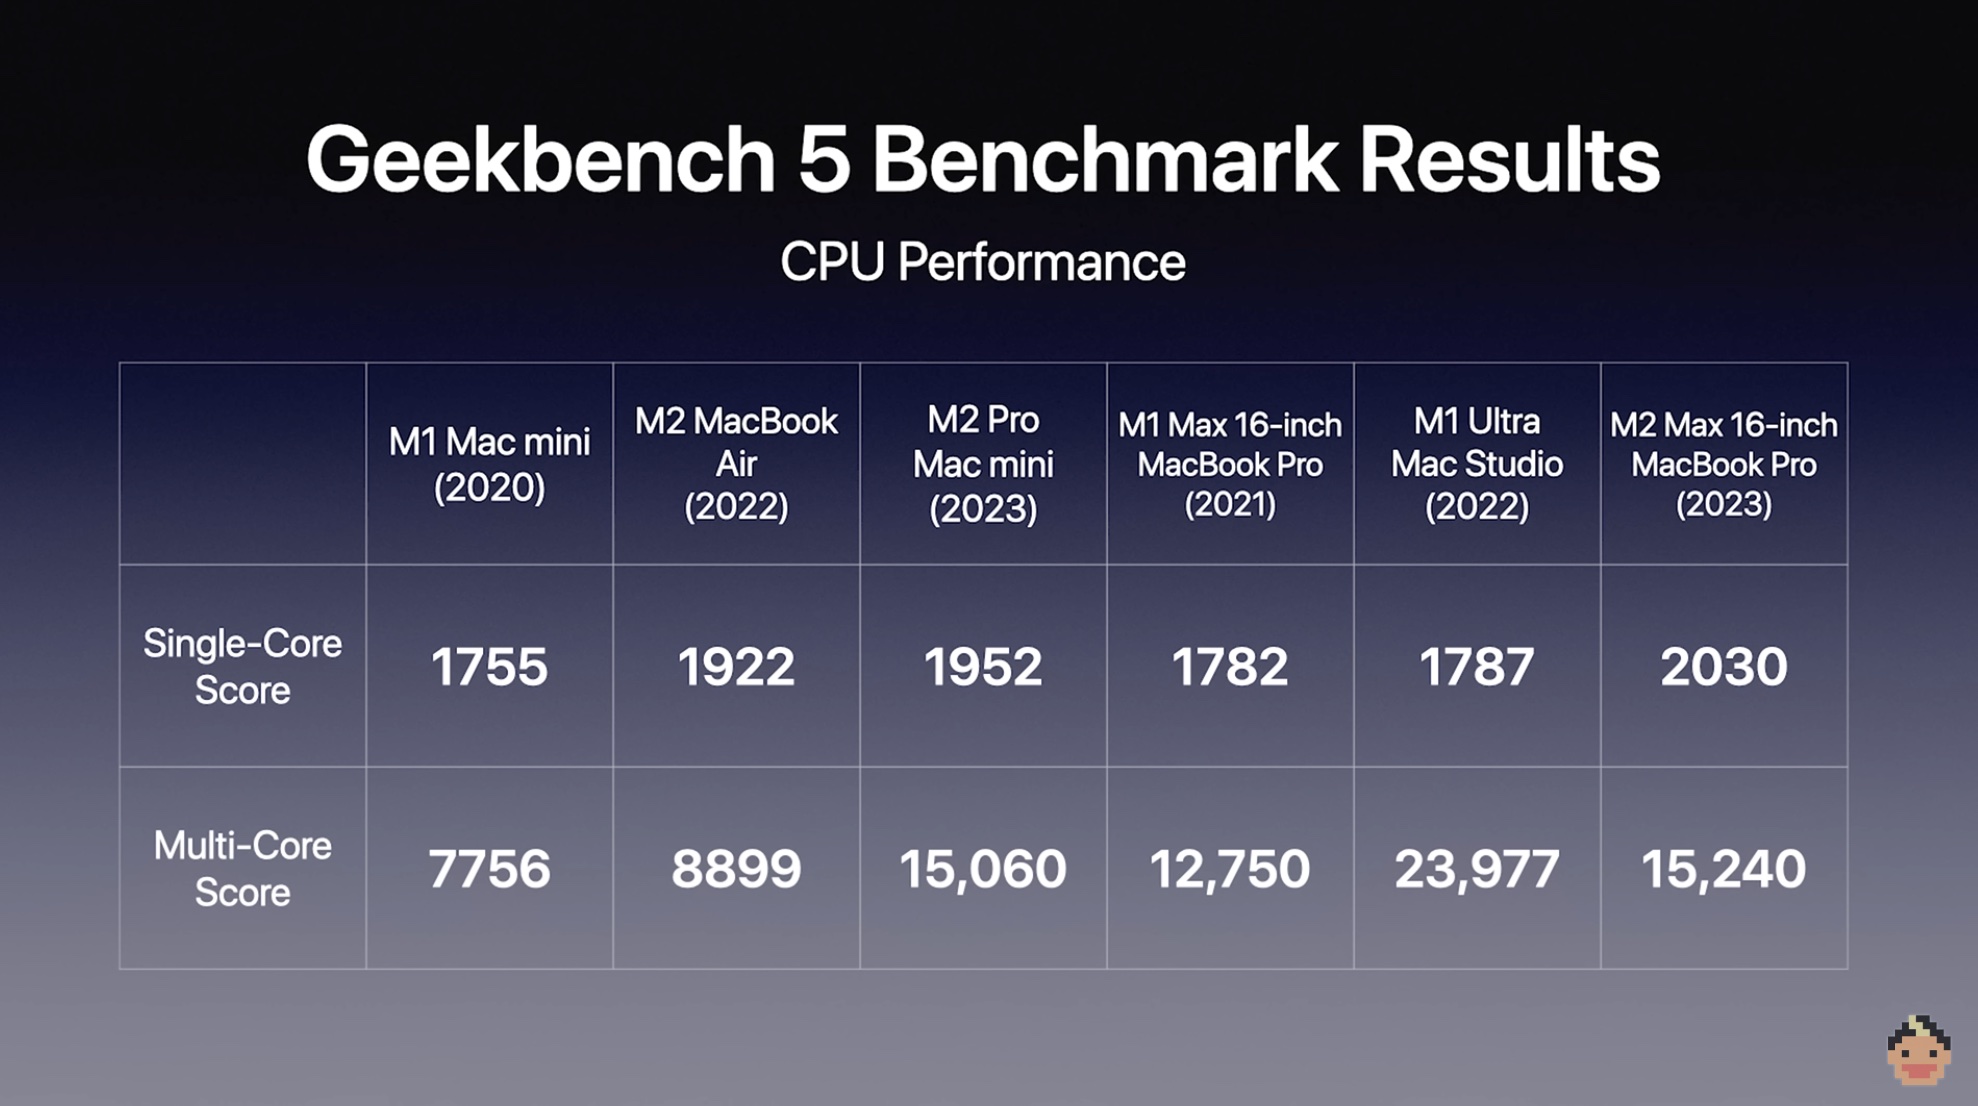 M2 Pro/Max vs M1 Pro/Max: How much faster are the newest Apple Silicon chips?